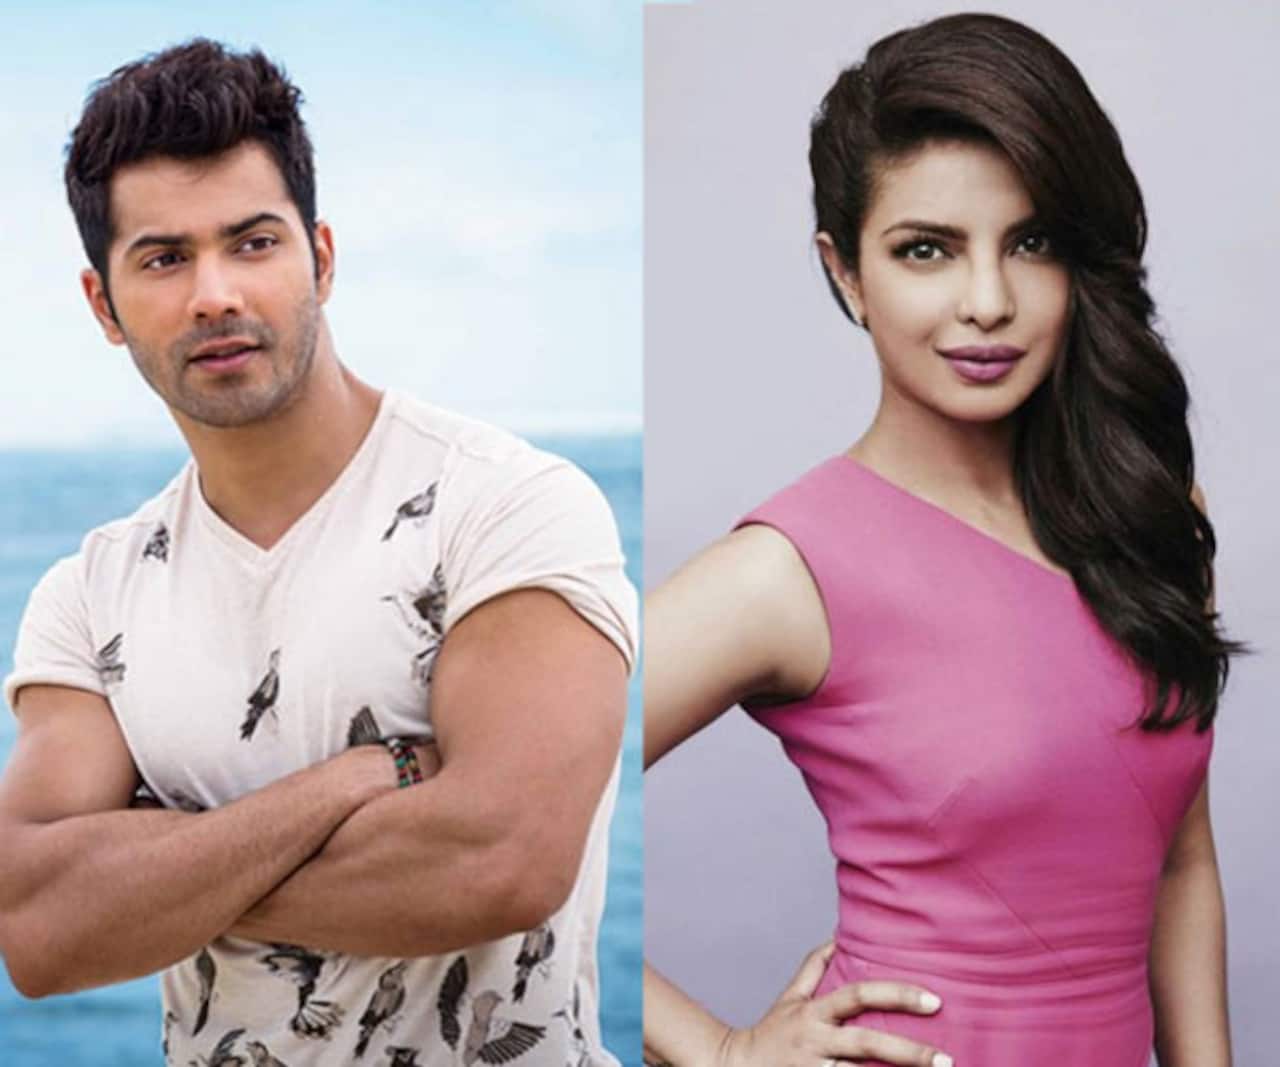 Here's what Varun Dhawan has to say about Priyanka Chopra-Quantico controversy